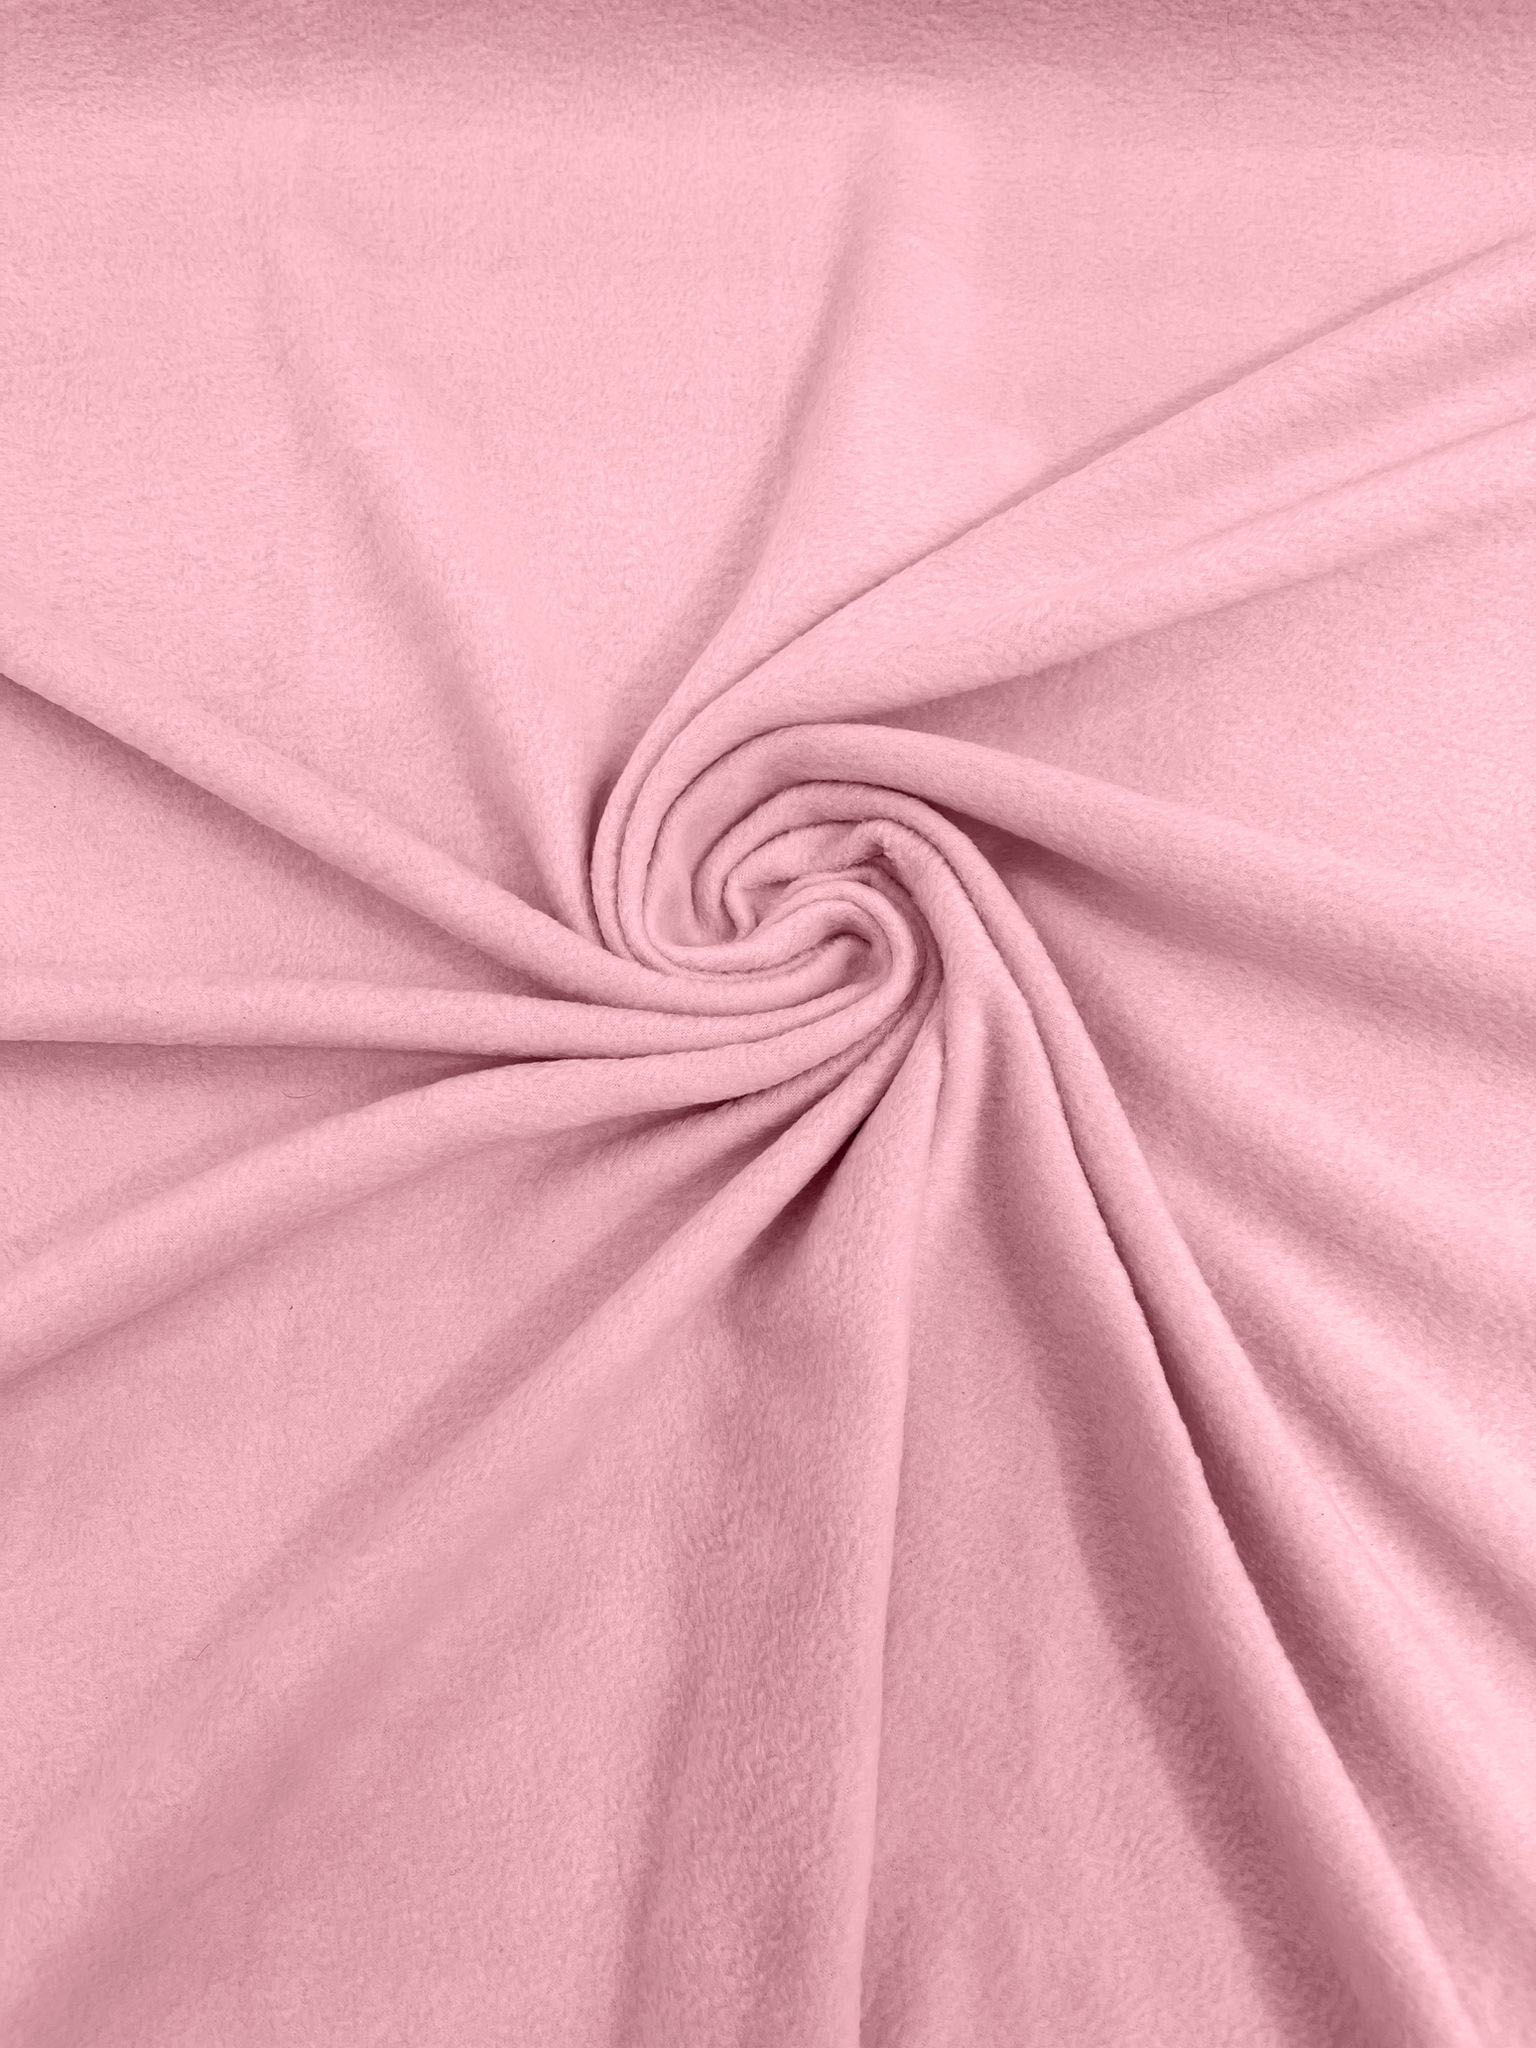 Pink Solid Polar Fleece Fabric Anti-Pill 58" Wide Sold by The Yard